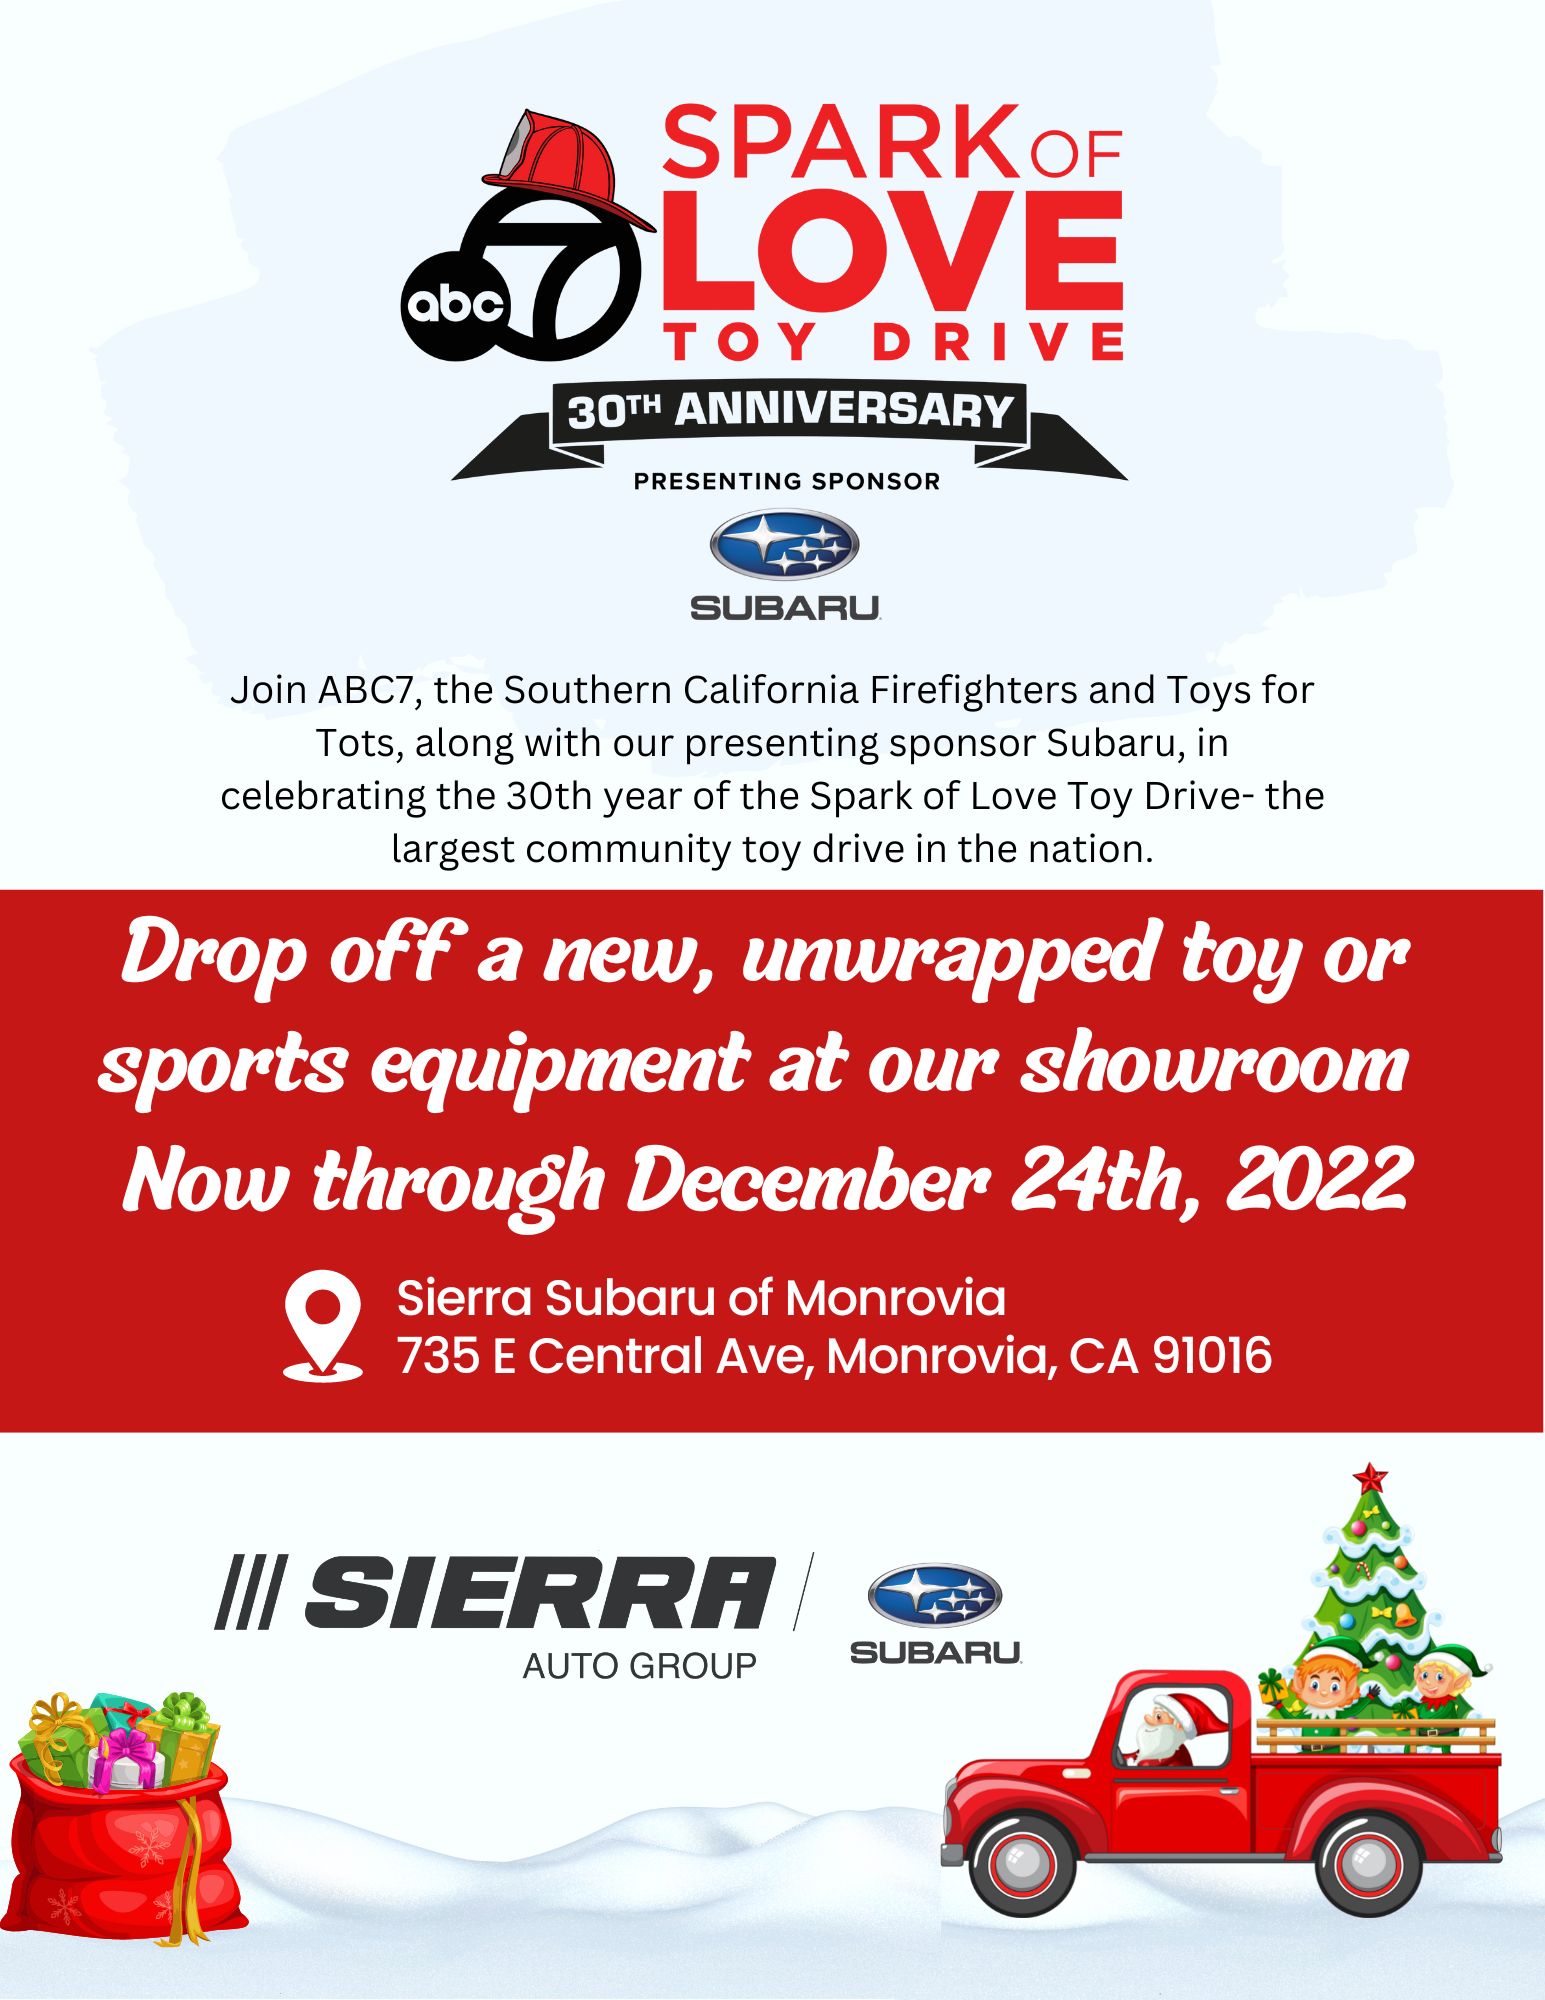 Subaru Spark of Love toy drive event flyer